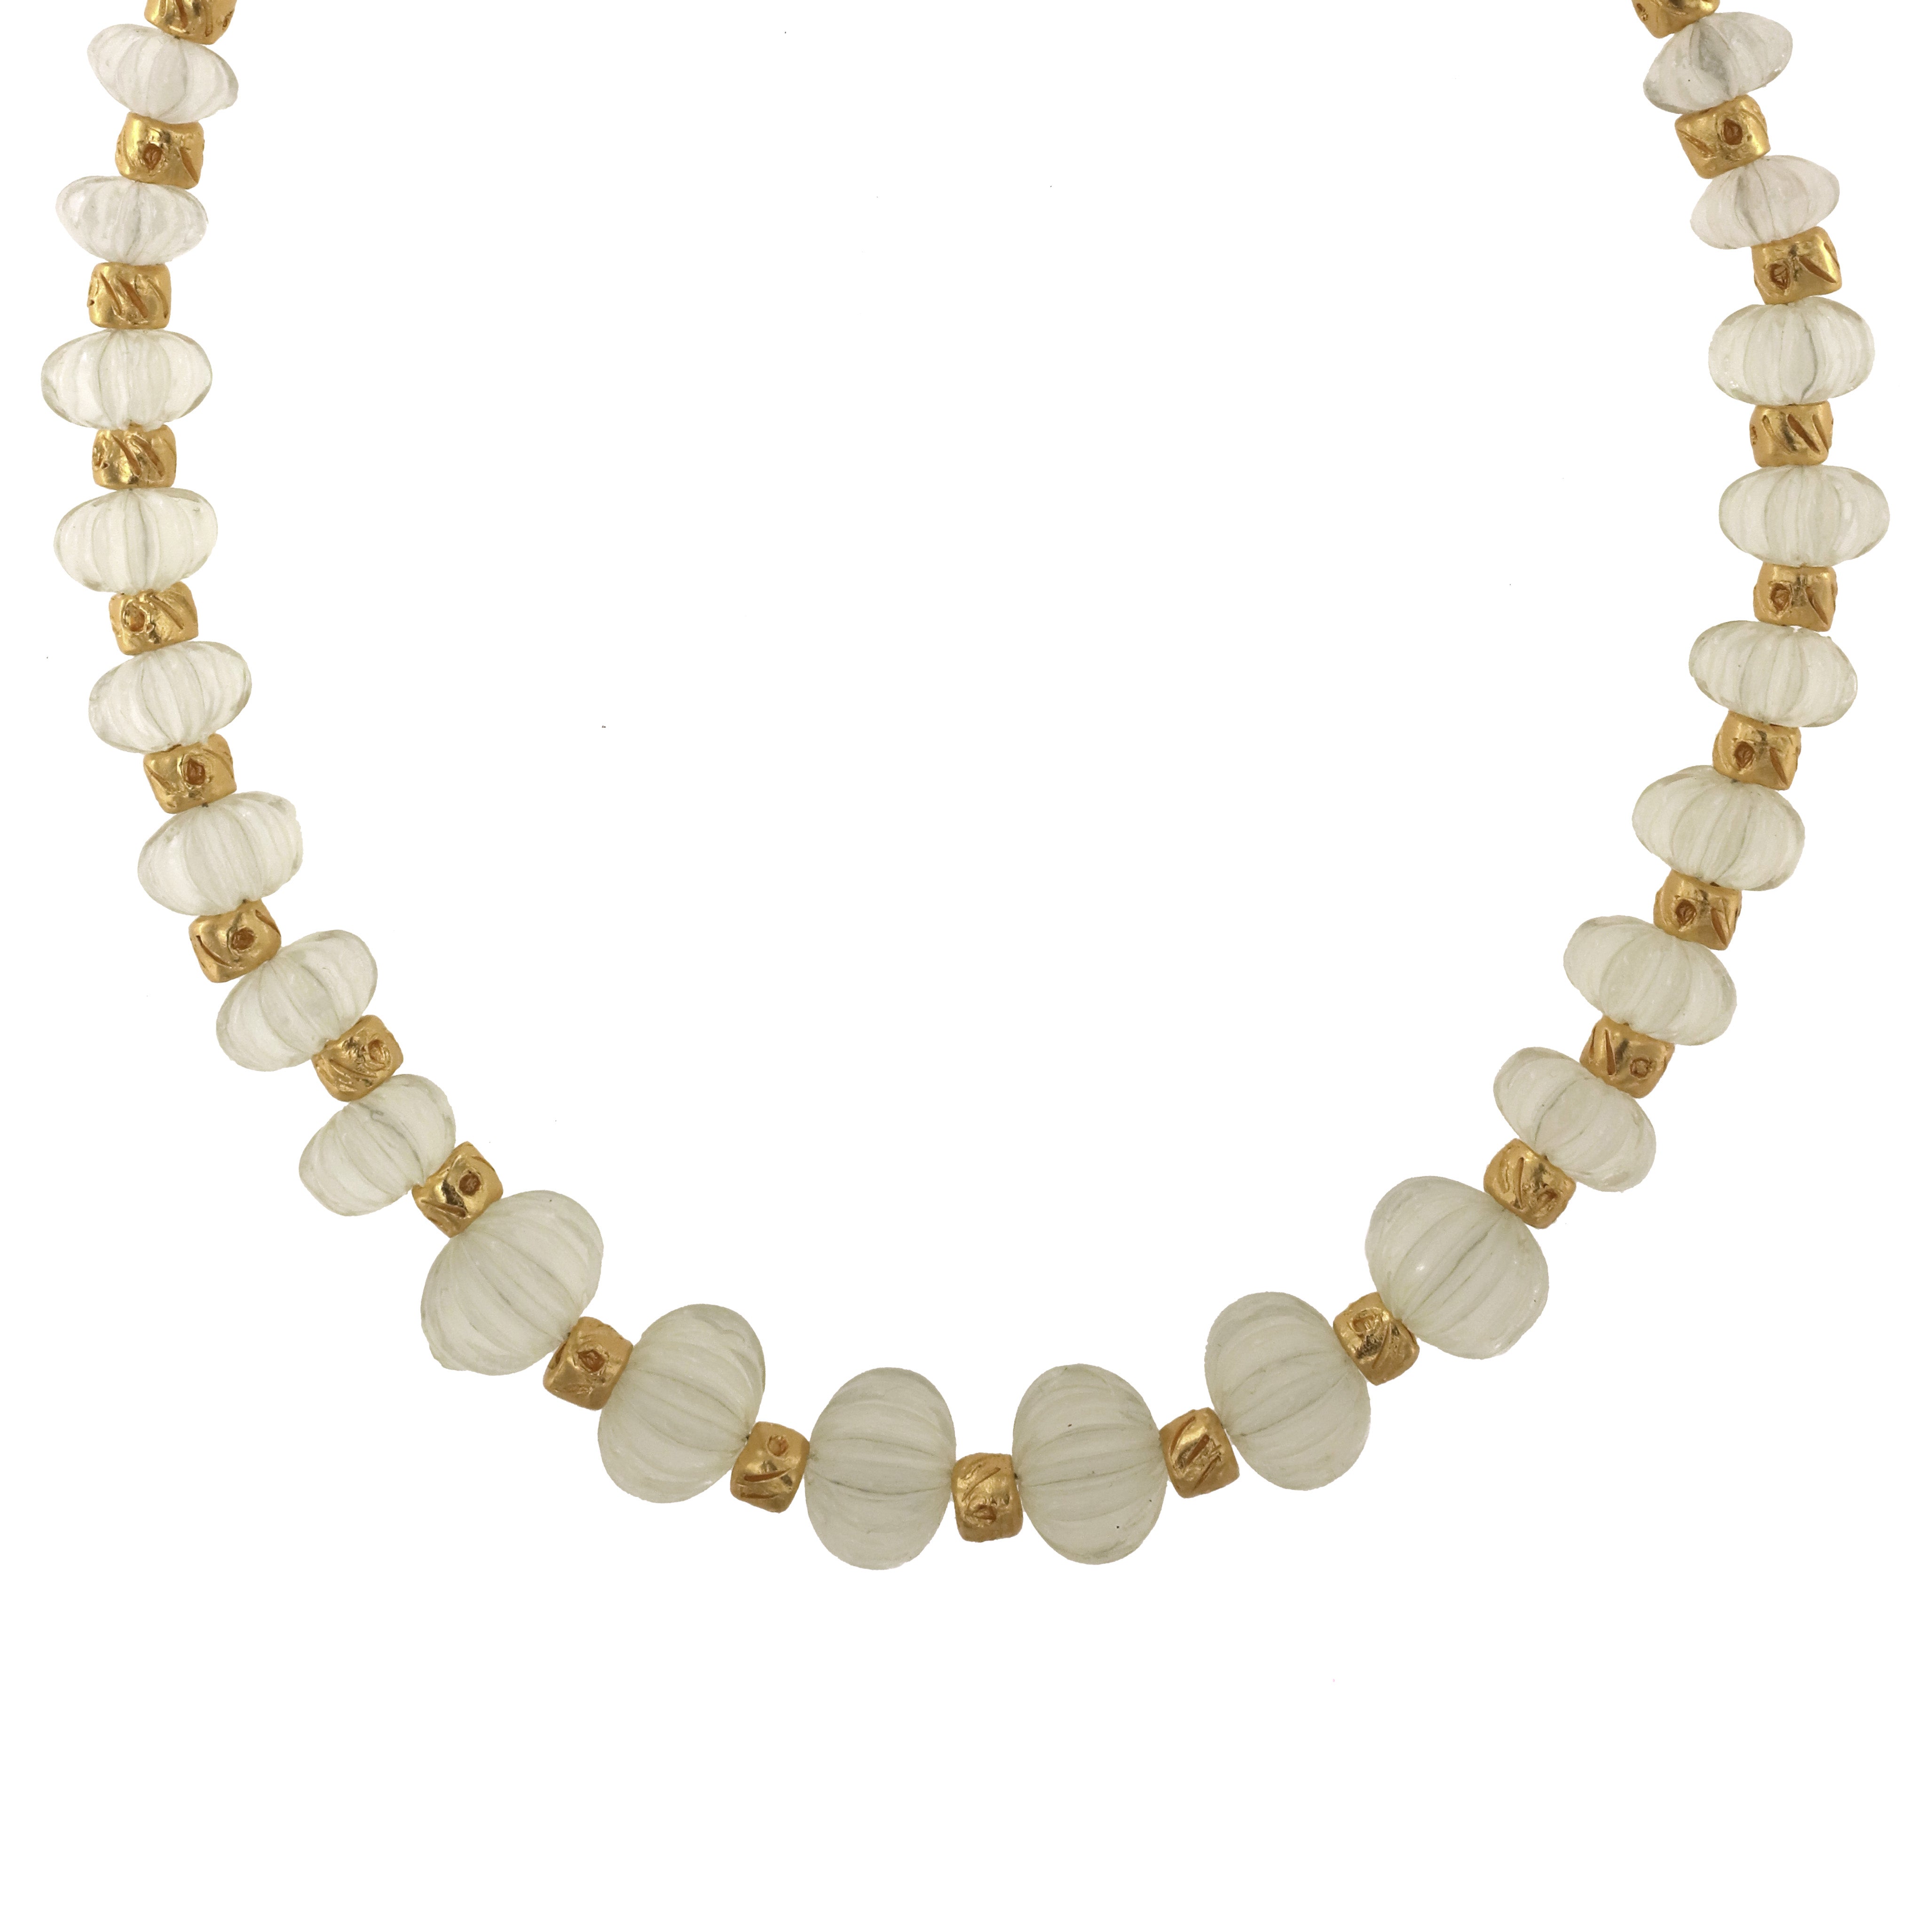 CO.NK.113 Necklace – 18K Gold Plated